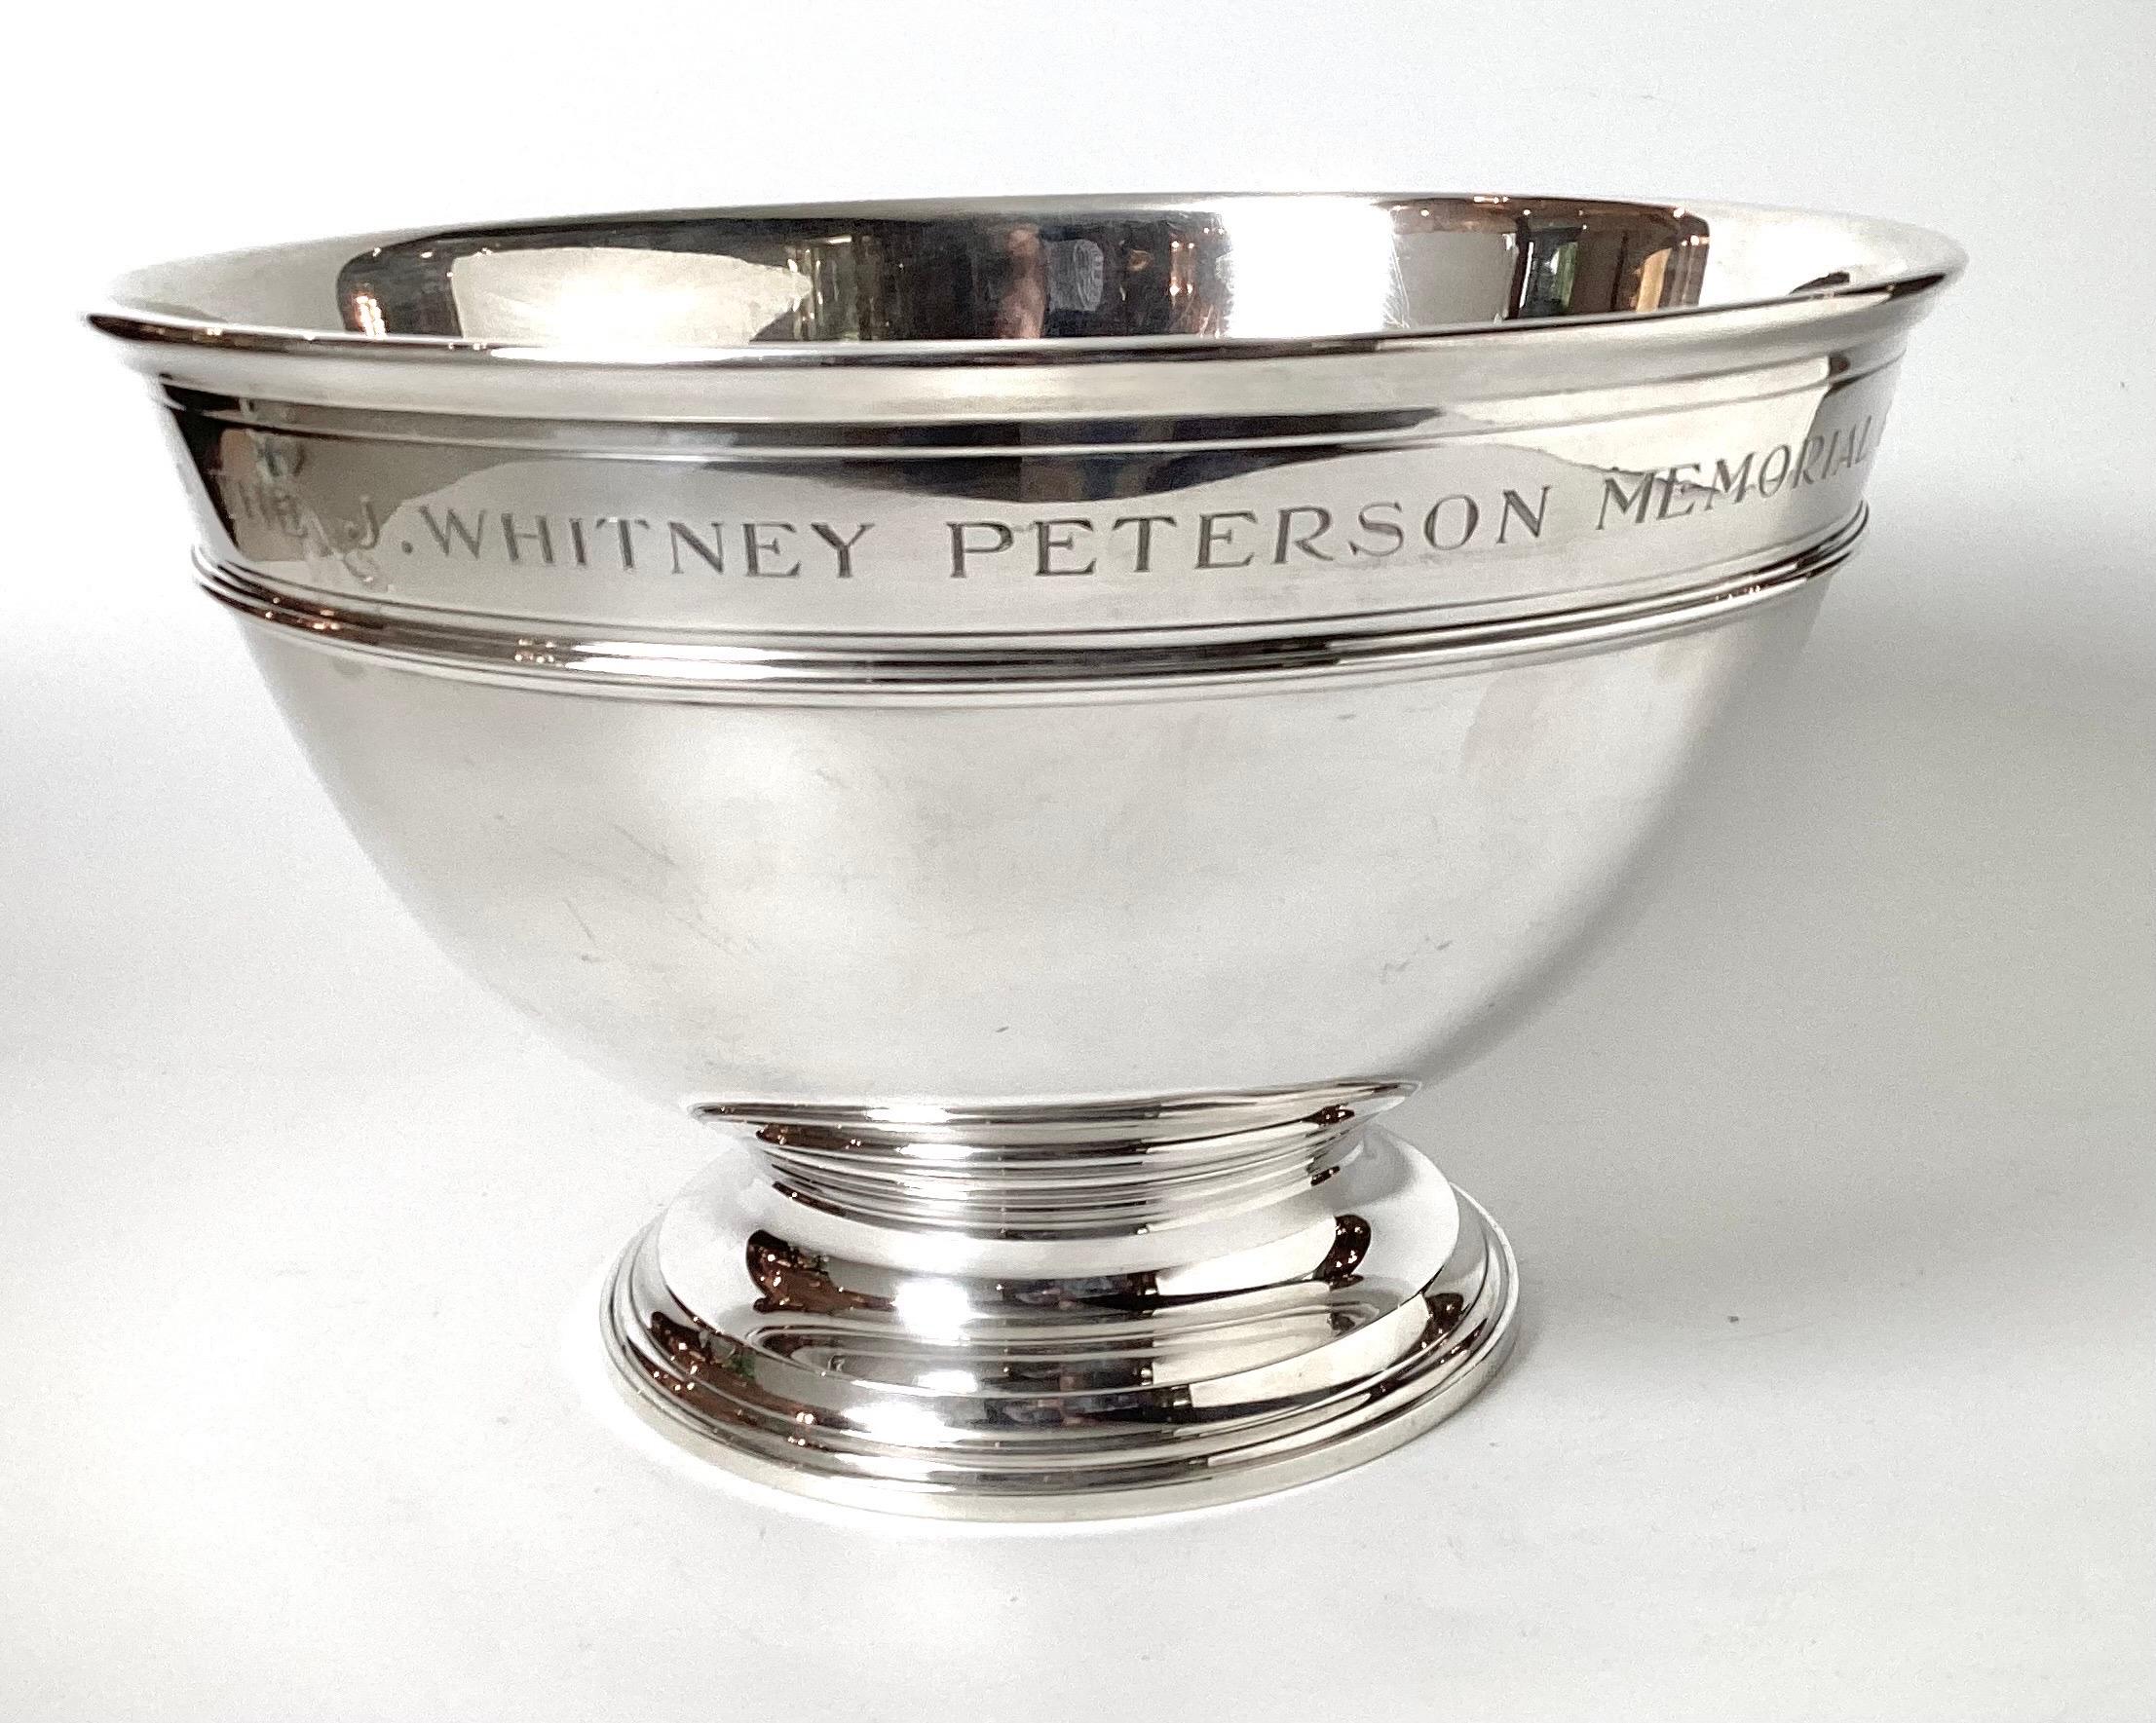 An impressive and heavy sterling silver punch bowl by Tiffany and Co, designed by William Thomas Lusk, 1950's  The elegant styled large bowl is 13 inches in Diameter, 8.5 inches tall and weighs 82 oz.  The bowl with the engraving 